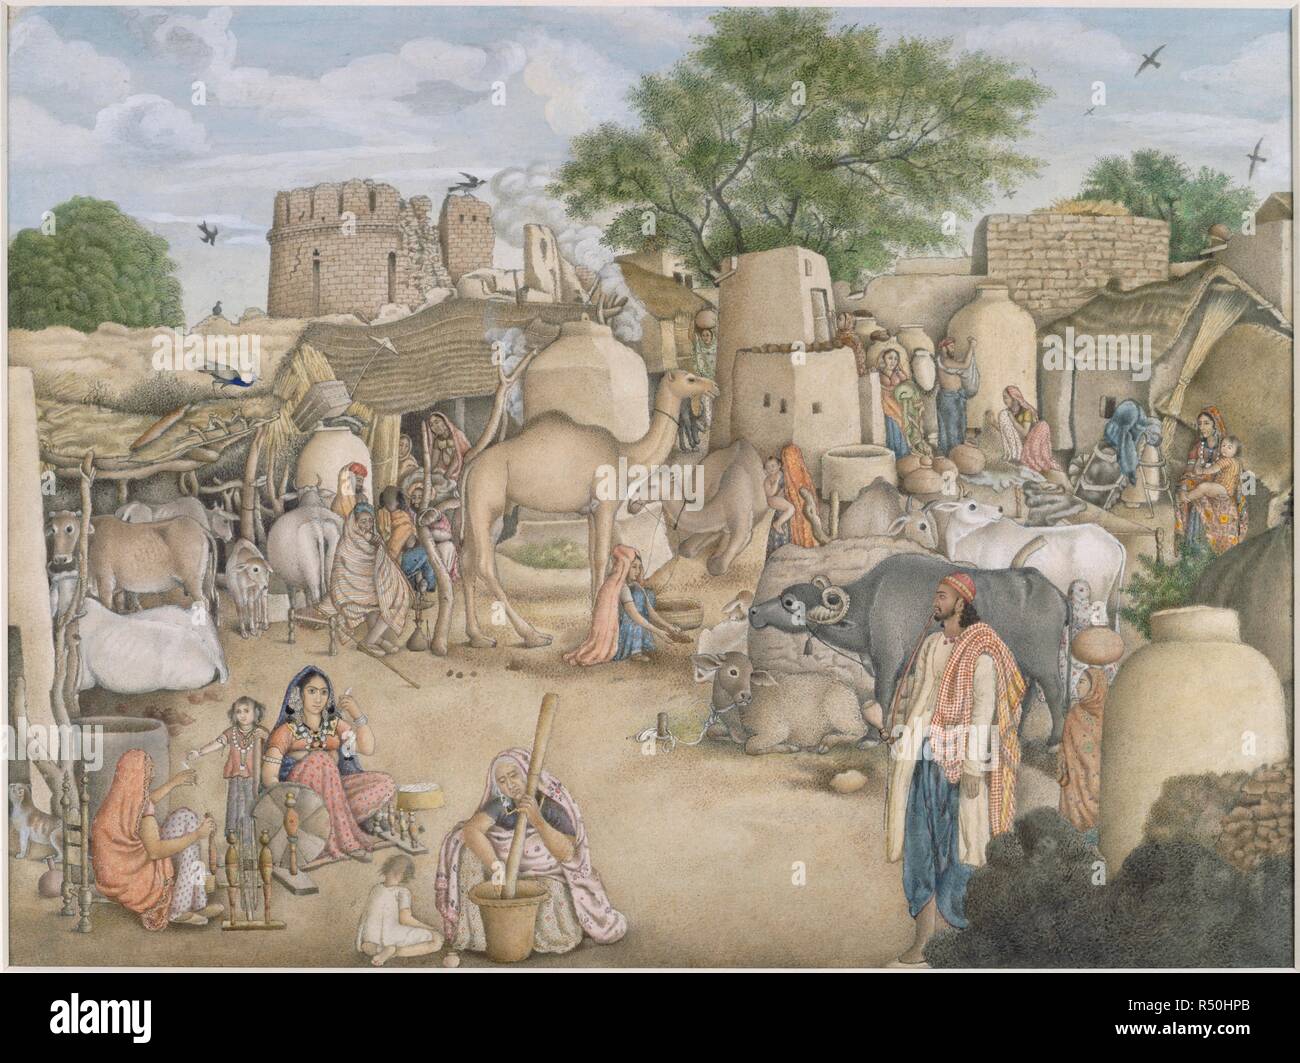 A street scene in the village of Raniya. In the foreground a young woman sits spinning, a child beside her and other women around her. In the background between the houses and giant jars are cattle, camels and numerous other figures going about their business. 1816-1820. Opaque watercolour. Source: Add.Or.4057. Stock Photo